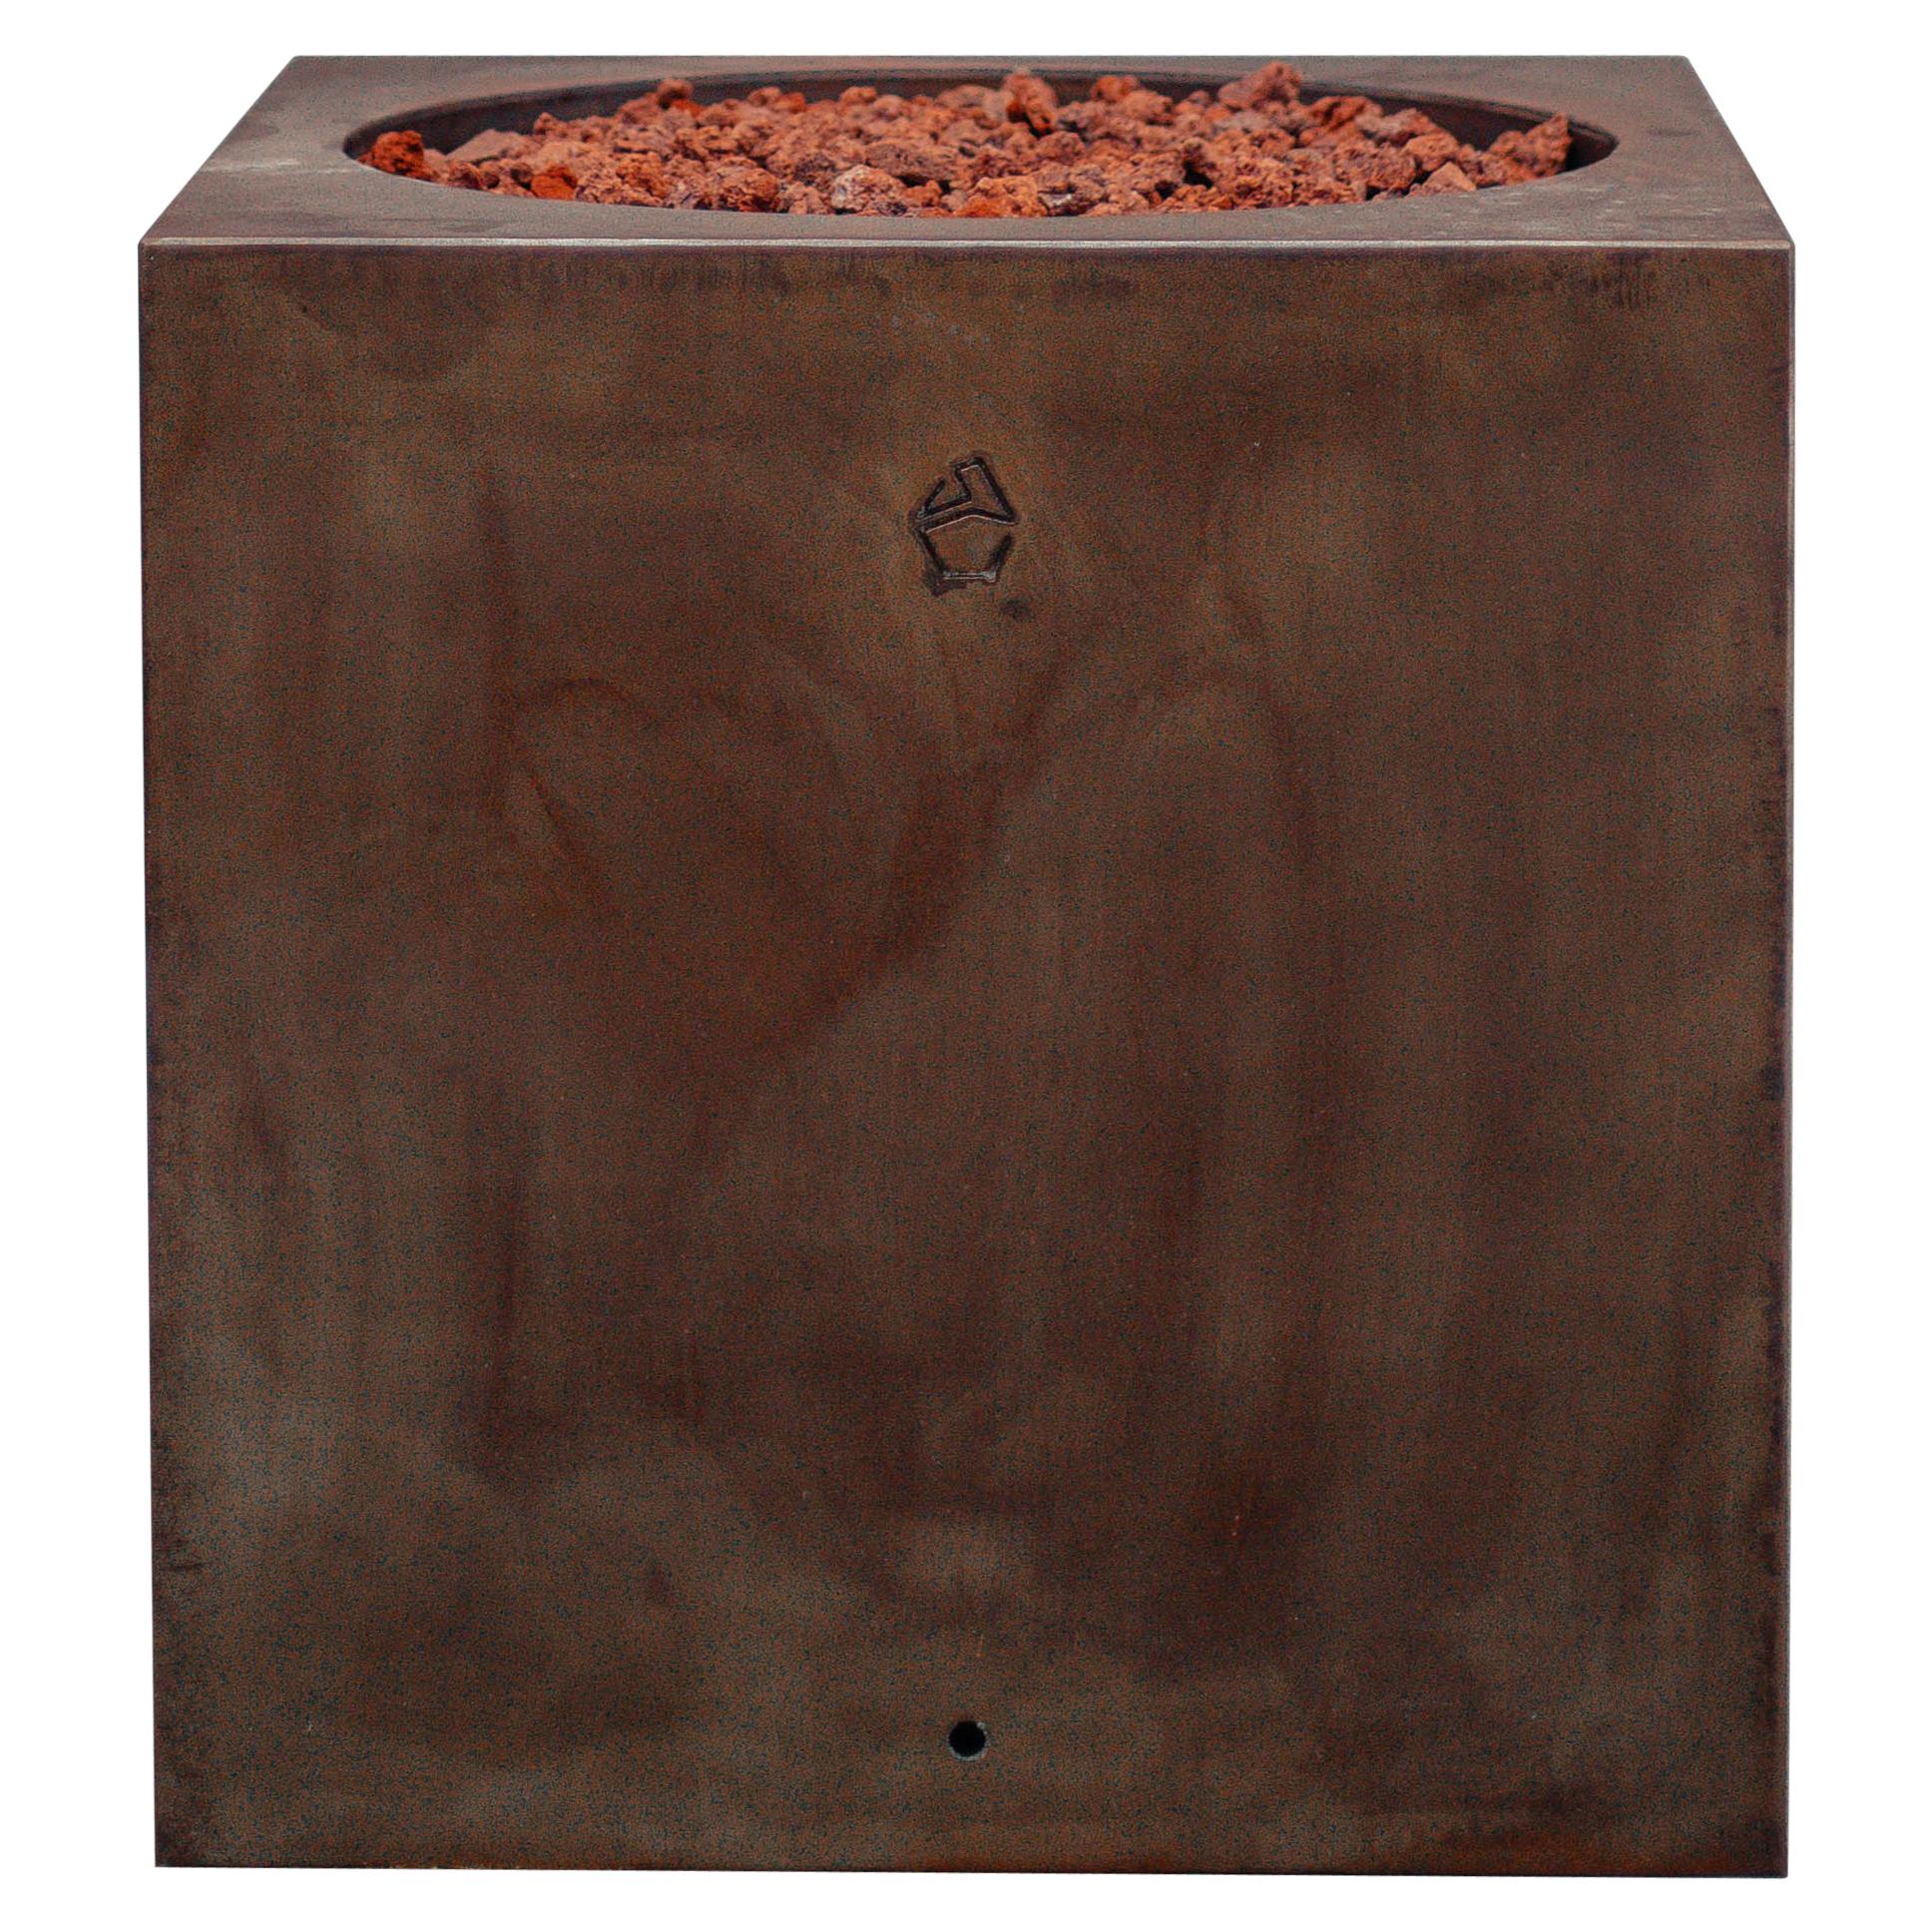 Oxidazed Cubus Firepit by Andres Monnier For Sale